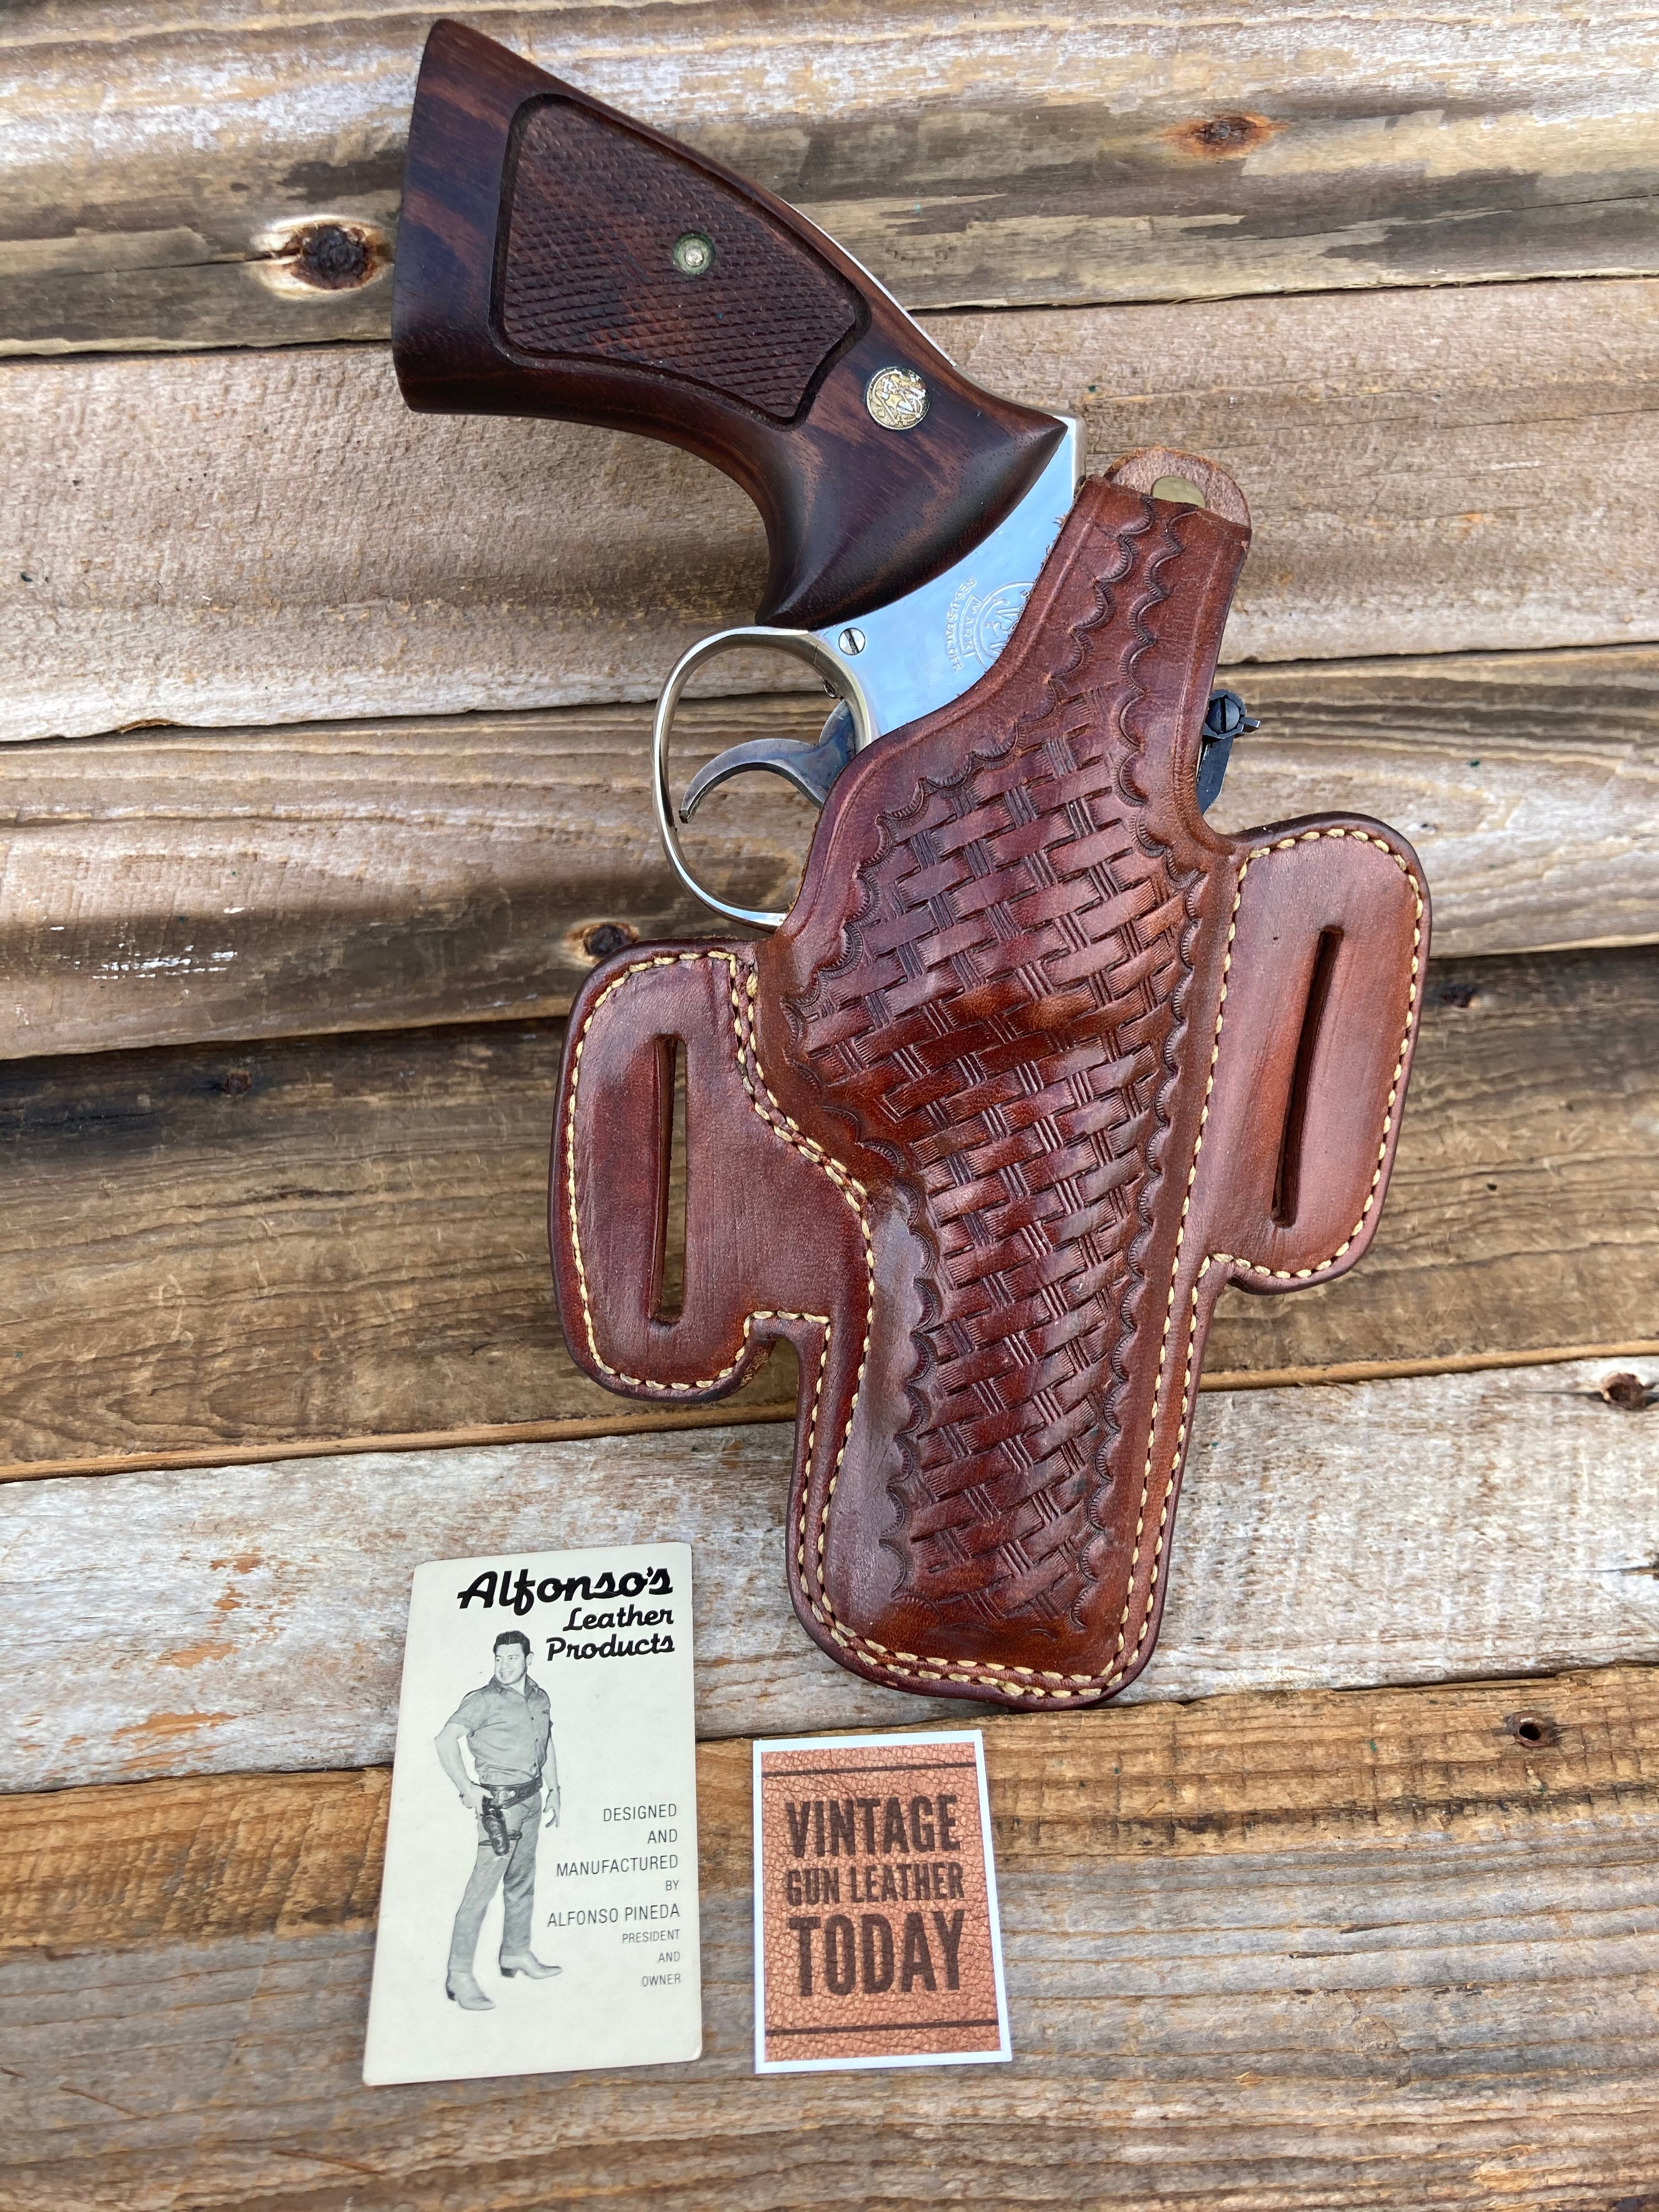 Alfonso's Brown Basketweave Leather Holster for S&W Medium K Frame